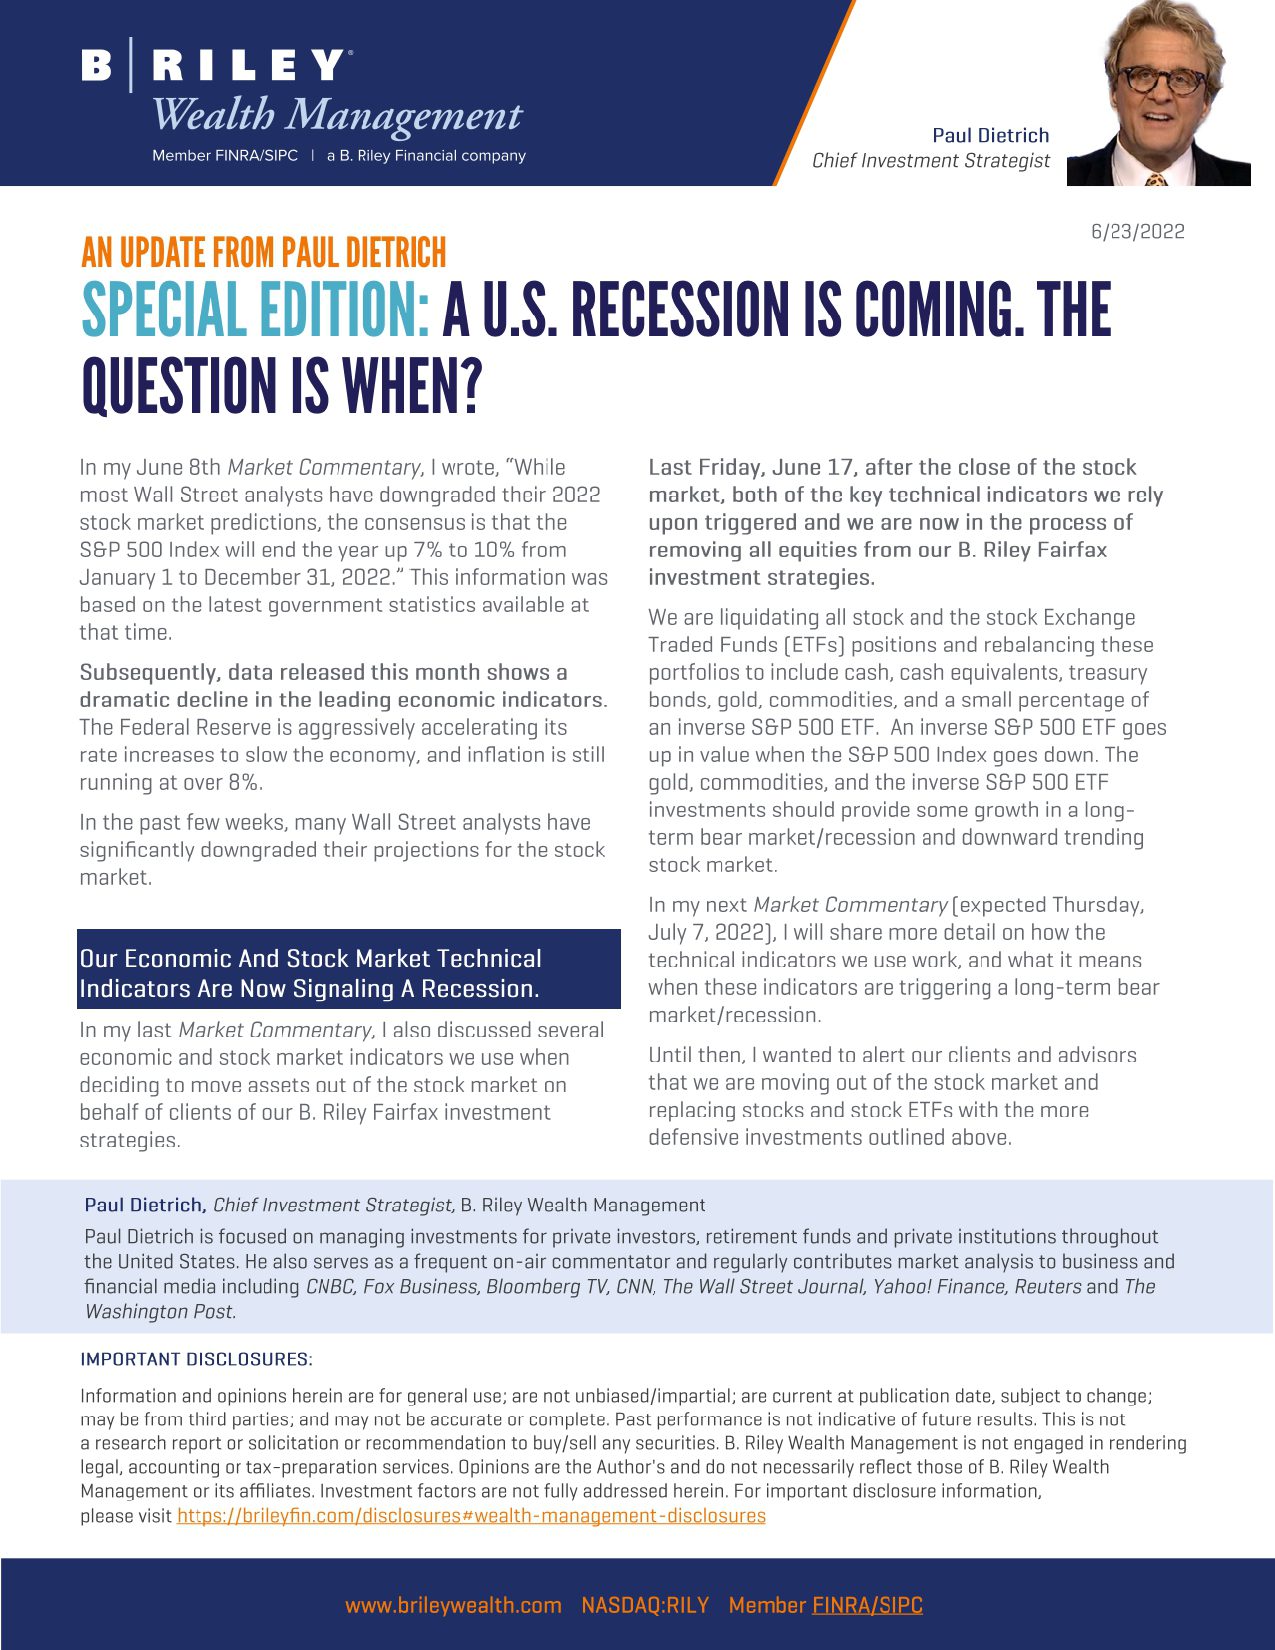 A U.S. Recession is Coming. The Question is When?